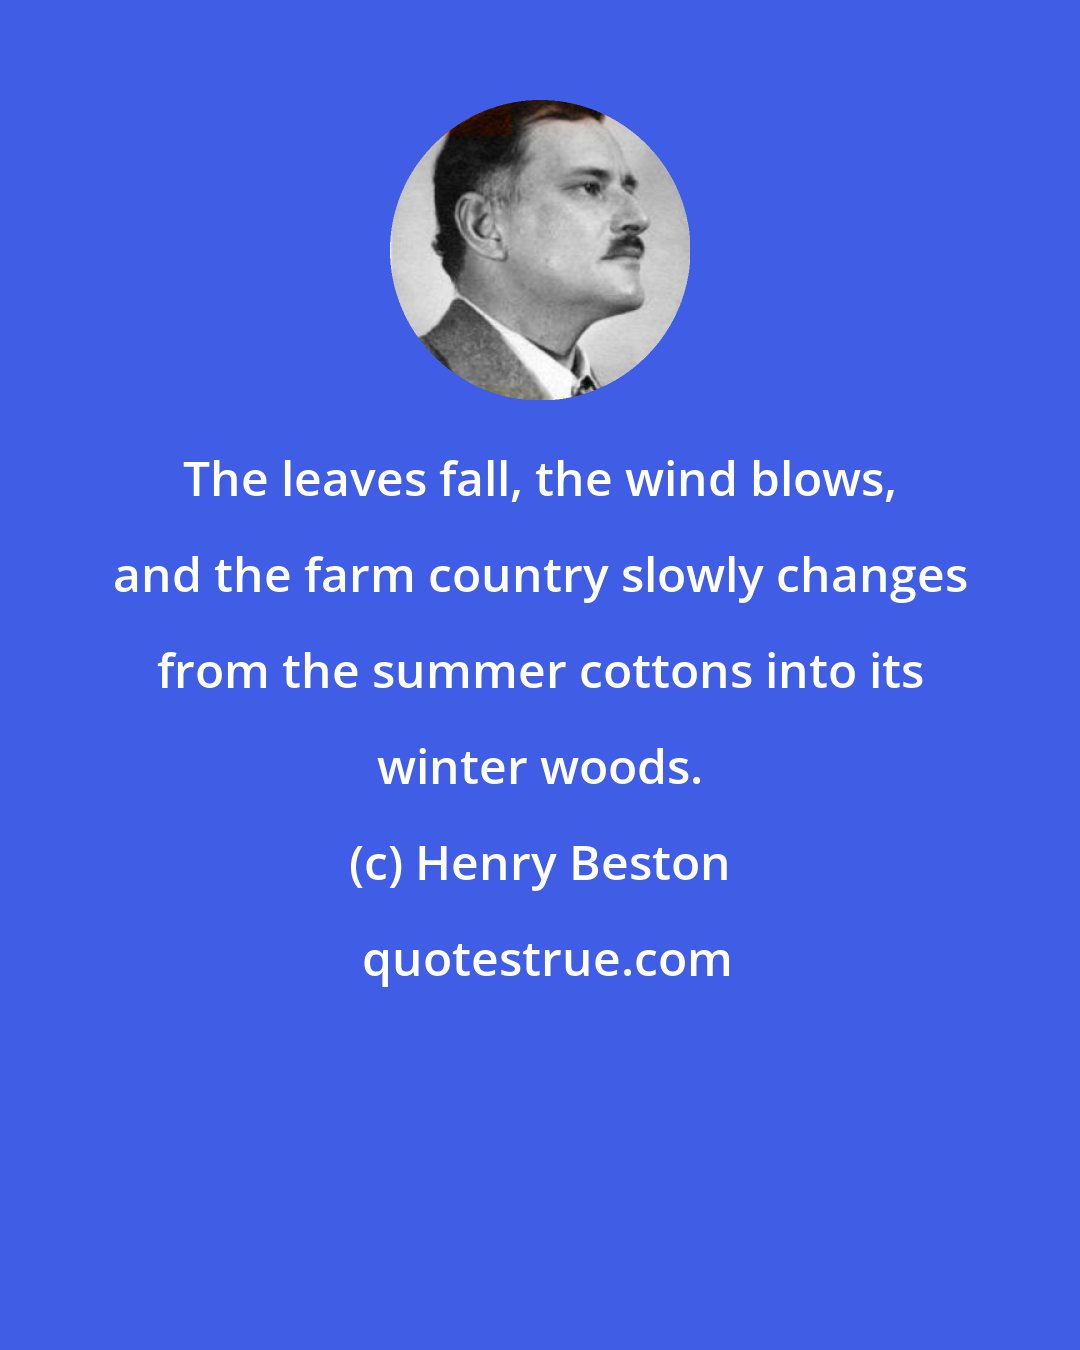 Henry Beston: The leaves fall, the wind blows, and the farm country slowly changes from the summer cottons into its winter woods.